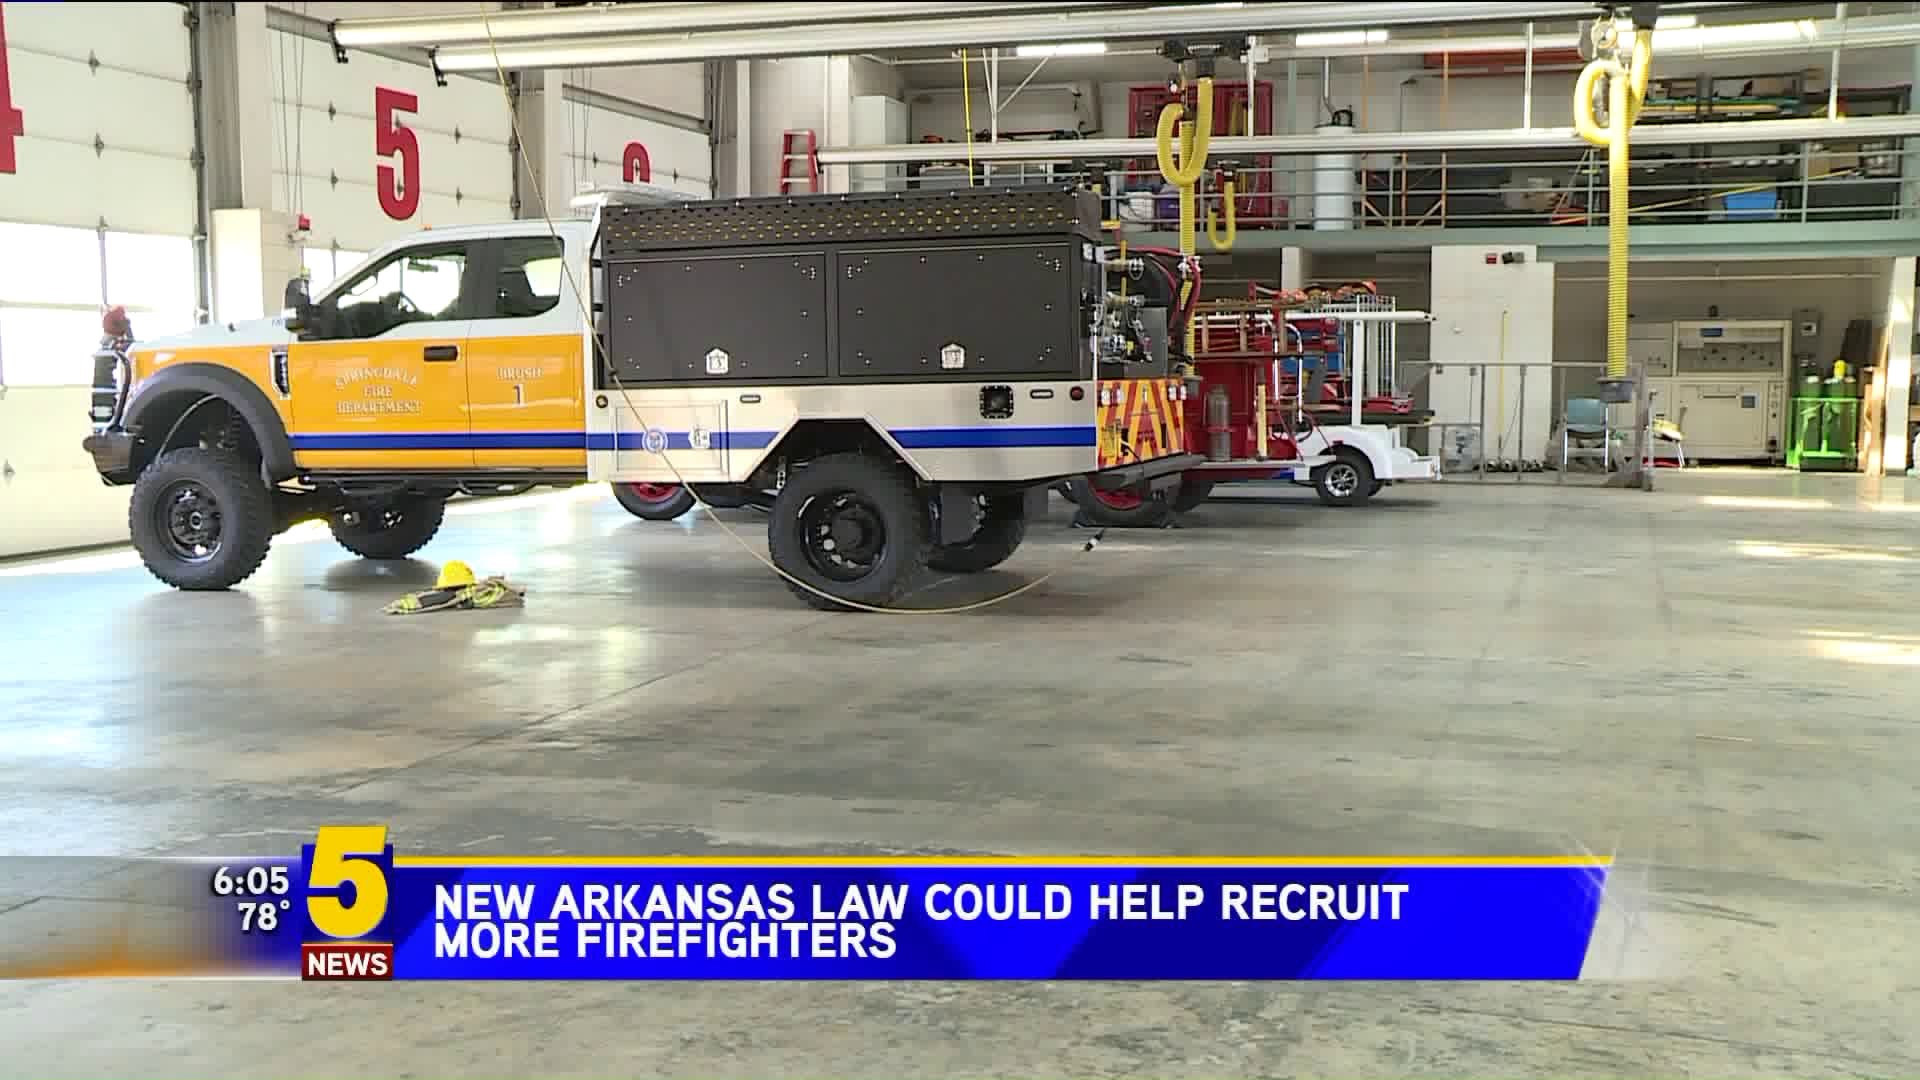 New Arkansas Law Could Help Recruit Firefighters